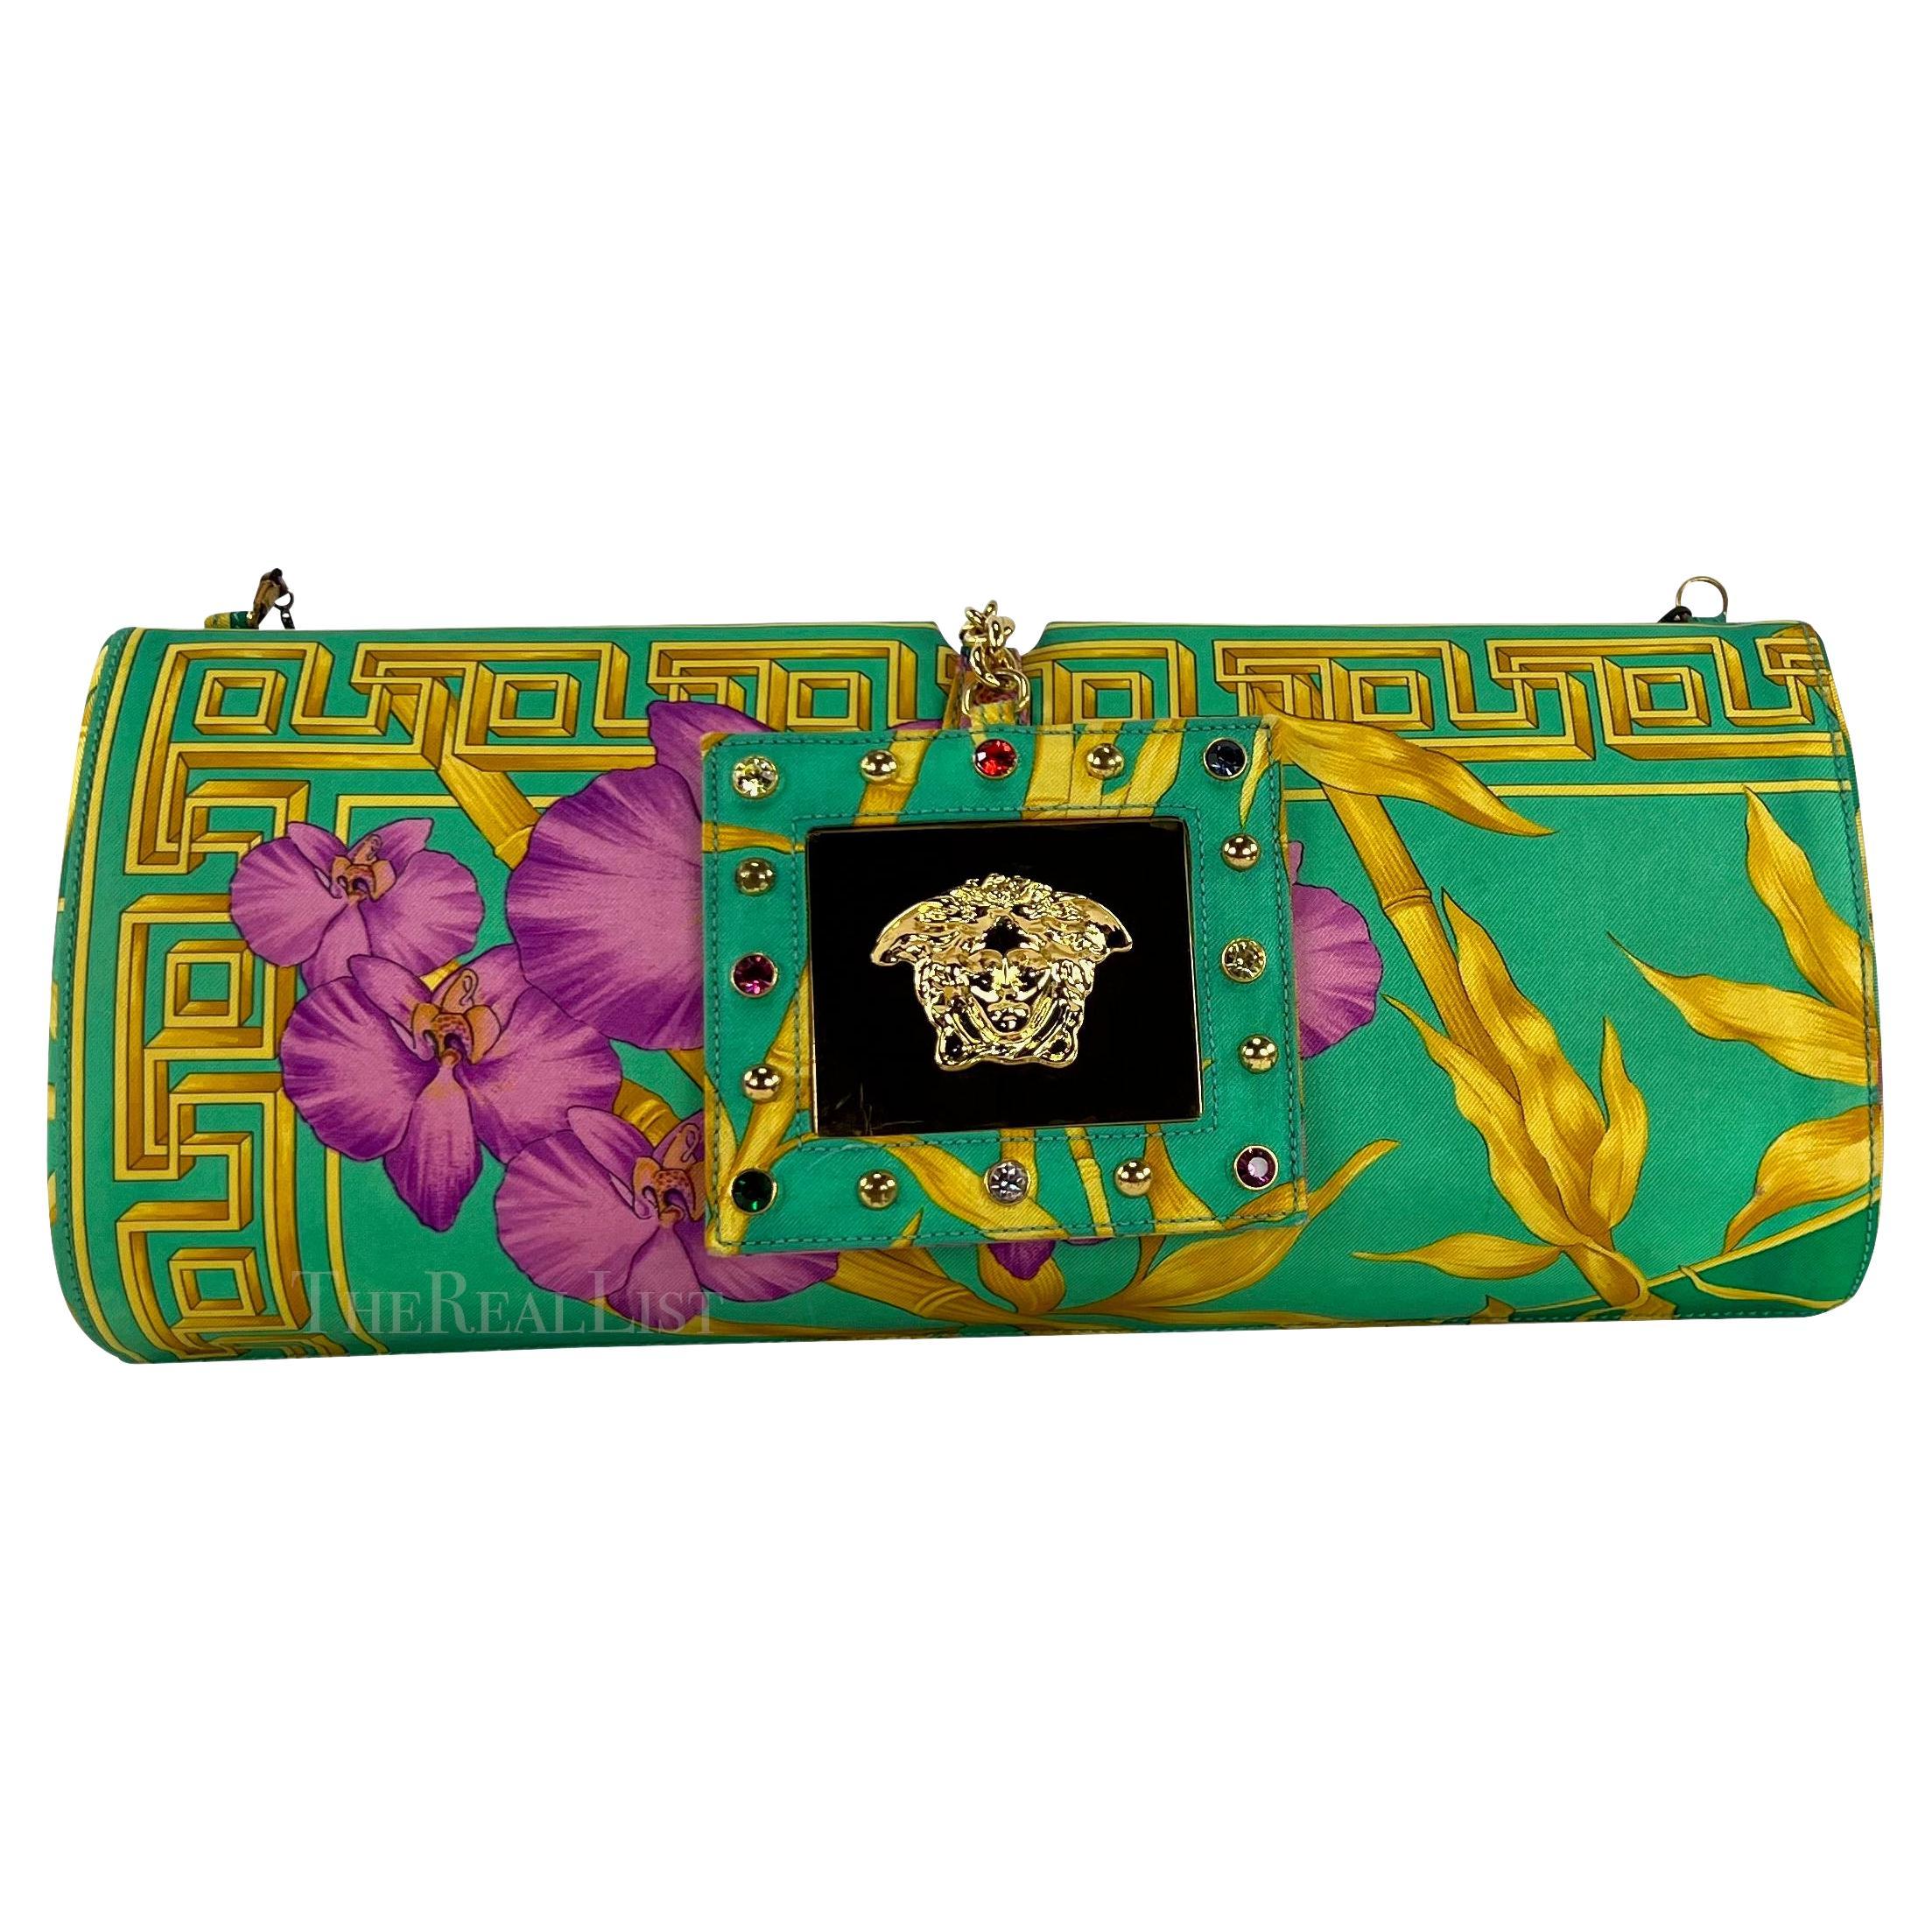 Women's S/S 2000 Gianni Versace by Donatella Green Floral Convertible Runway Clutch For Sale